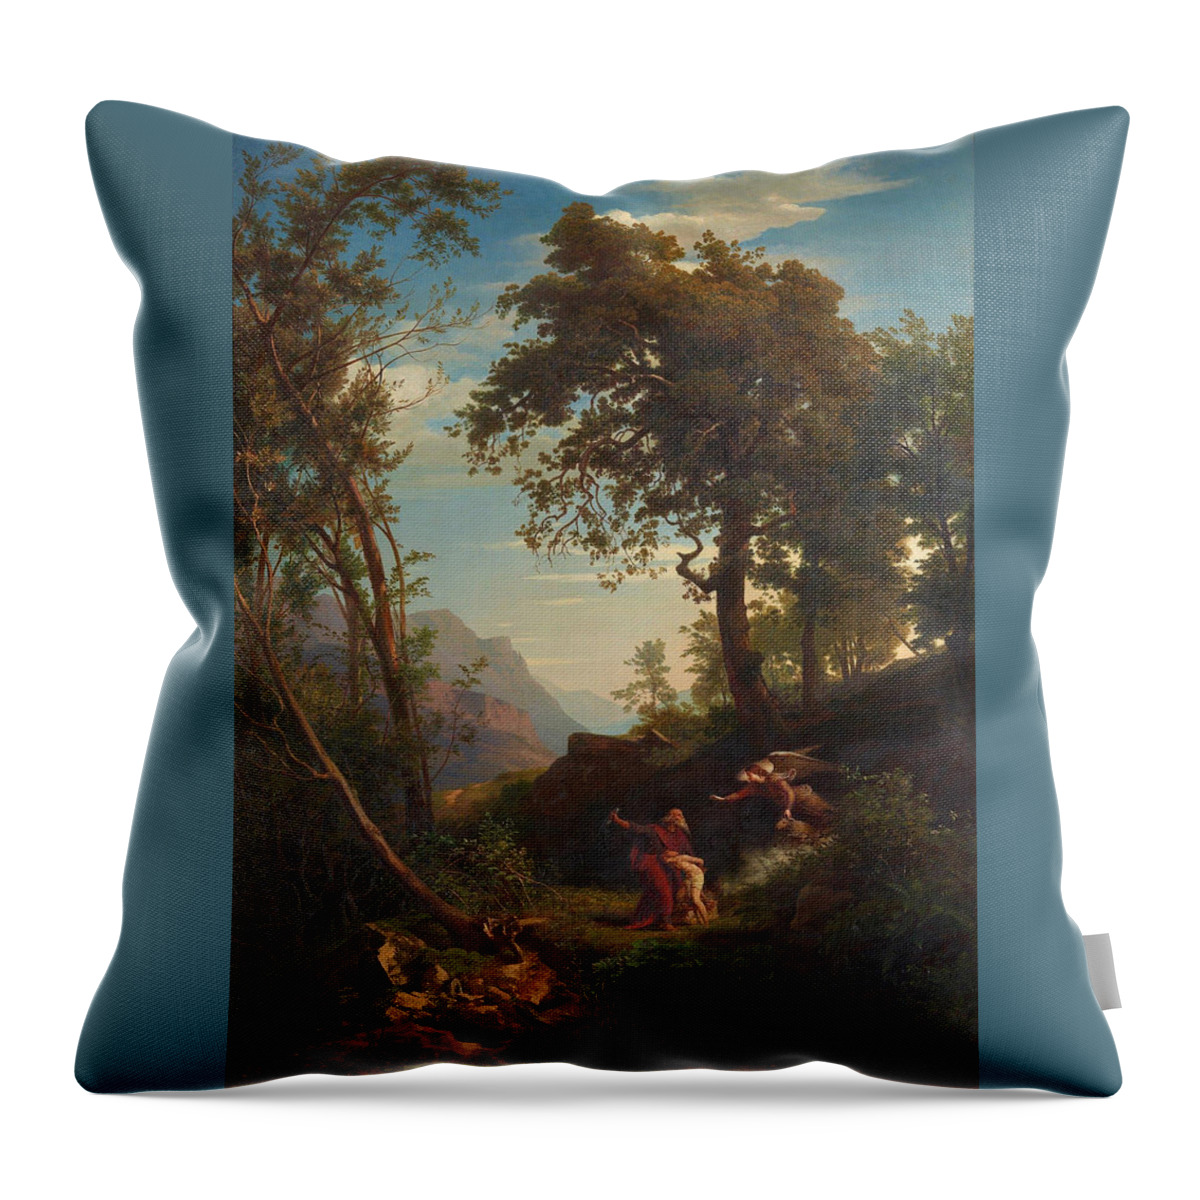 Johann Wilhelm Schirmer Wilhelm Schirmer Throw Pillow featuring the painting The sacrifice of Isaac upper side  Abraham s lament for Sarah lower side  From the cycle Twelve biblical landscapes with the story of Abraham #3 by Johann Wilhelm Schirmer Wilhelm Schirmer